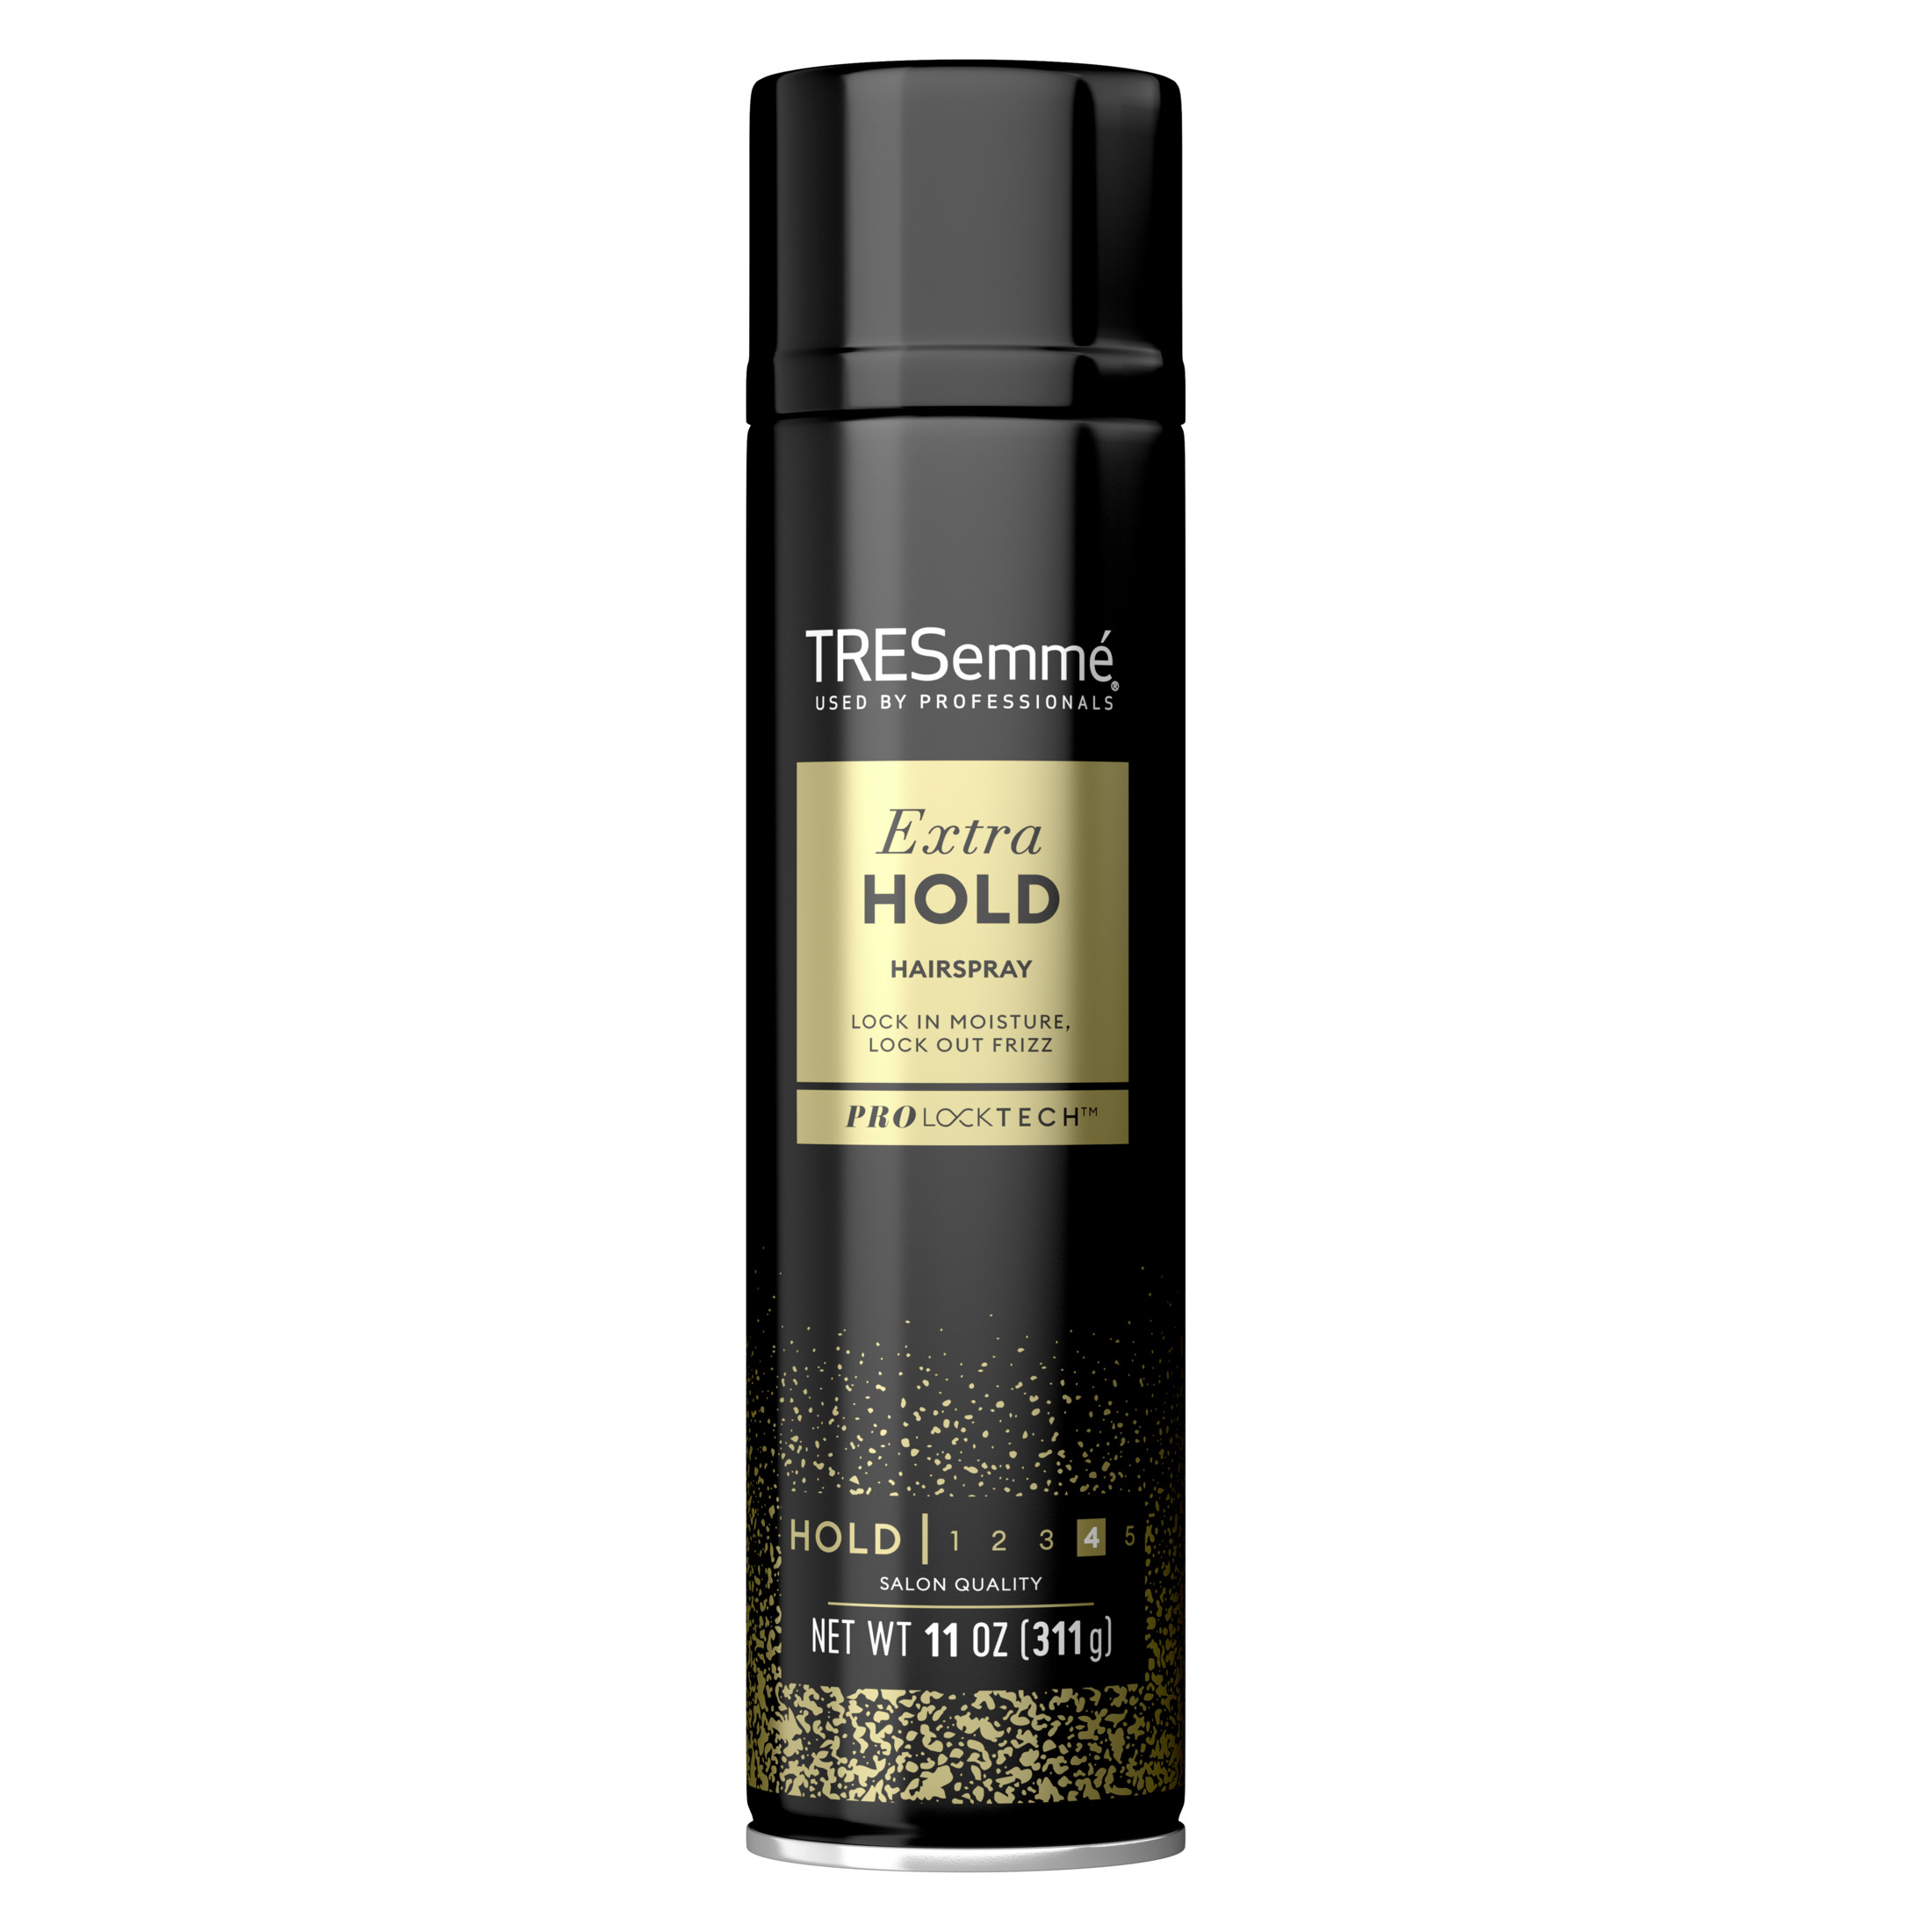 TRESemme Extra Hold Frizz Control Hairspray, 11 oz - image 1 of 14